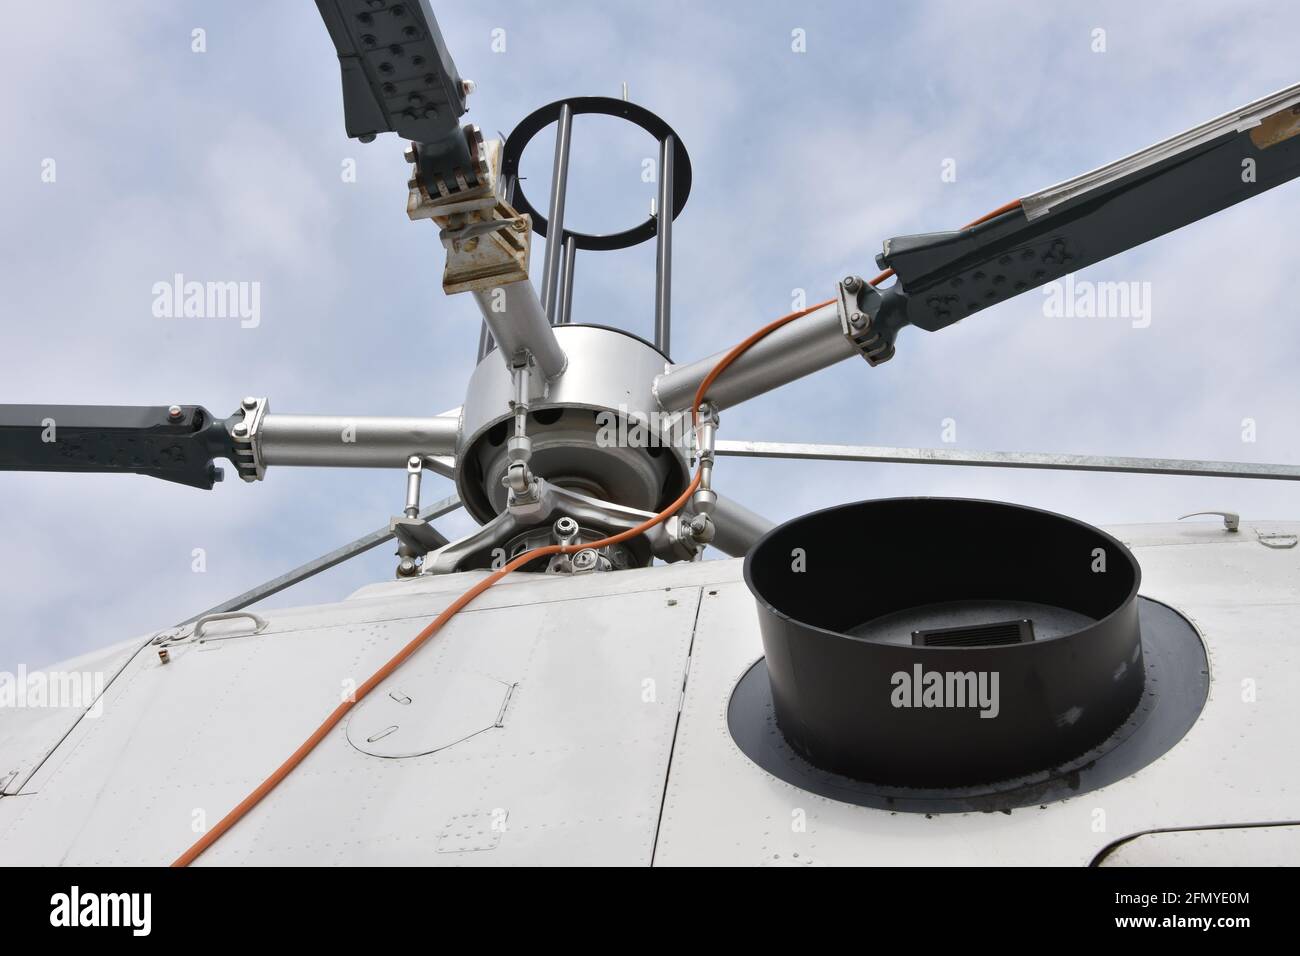 Detail view on main rotor blades and rotor mast of the white twin-engine multi mission or multipurpose Helicopter. Stock Photo